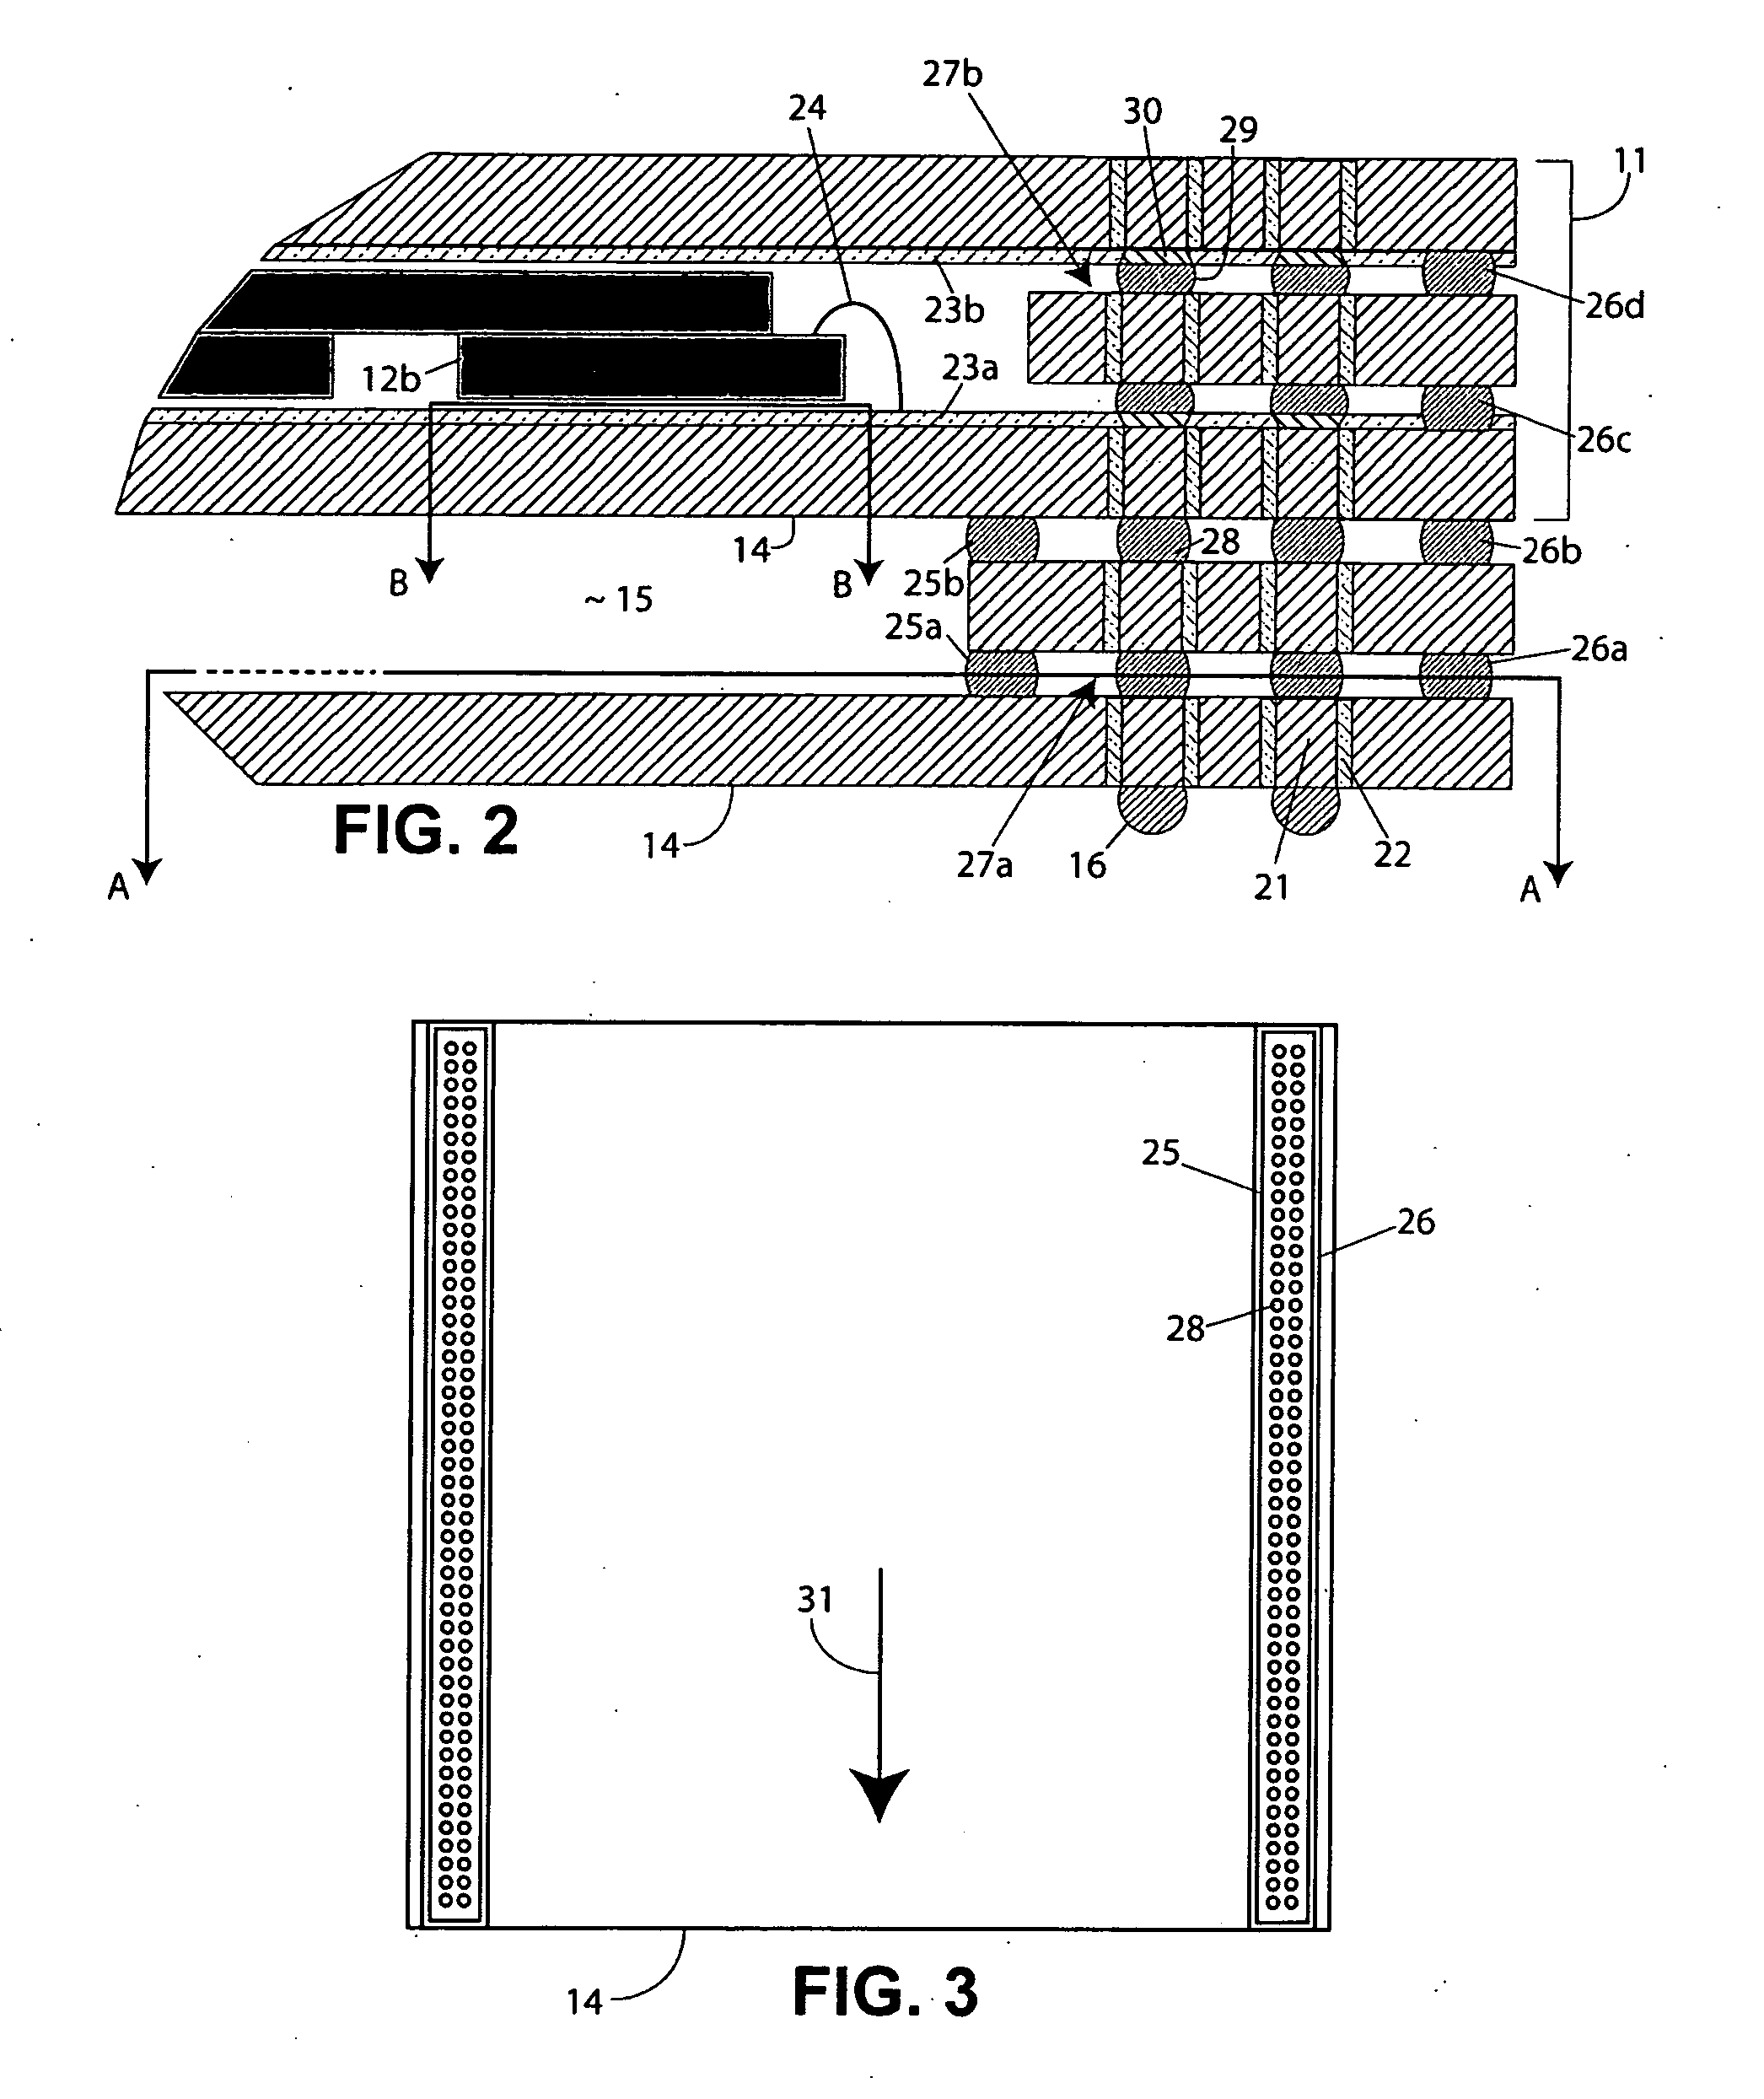 Scalable subsystem architecture having integrated cooling channels